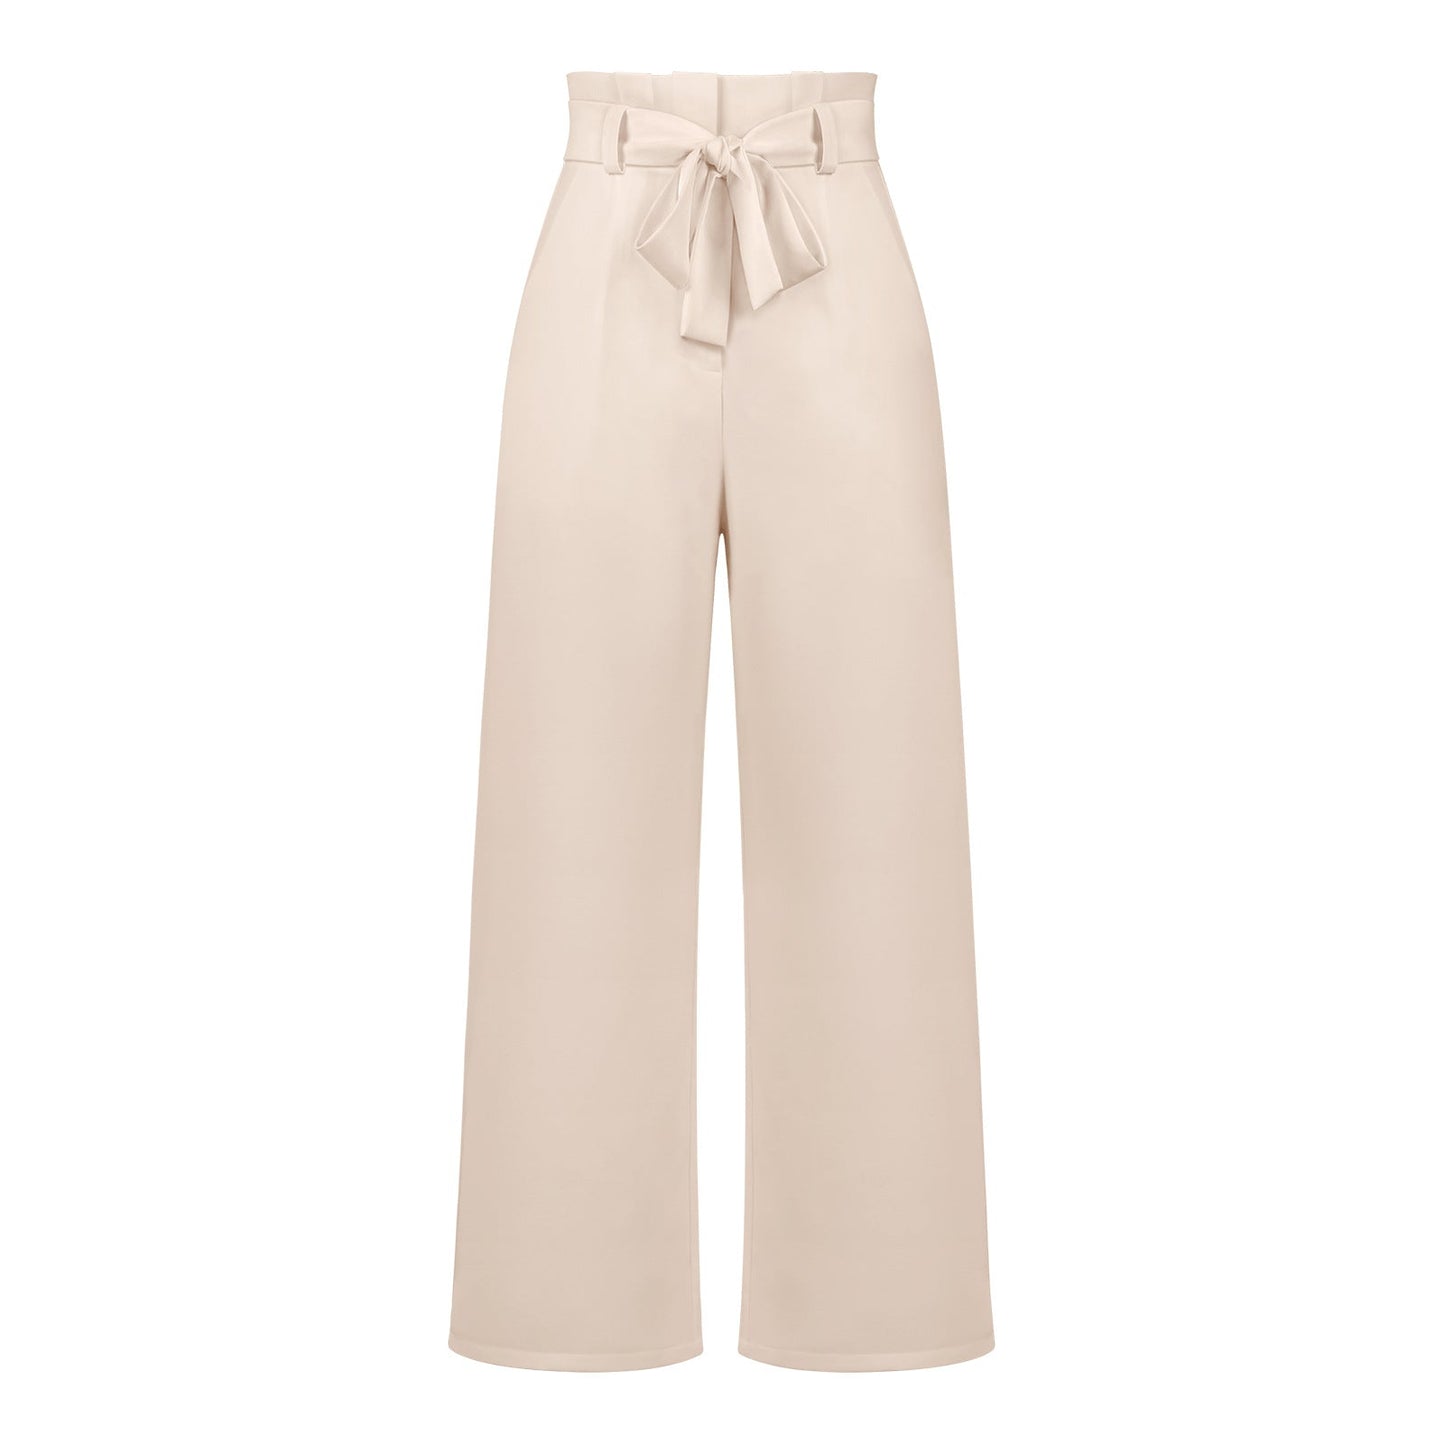 Elegant Office Lady Summer Wide Legs Pants-Pants-Apricot-S-Free Shipping Leatheretro